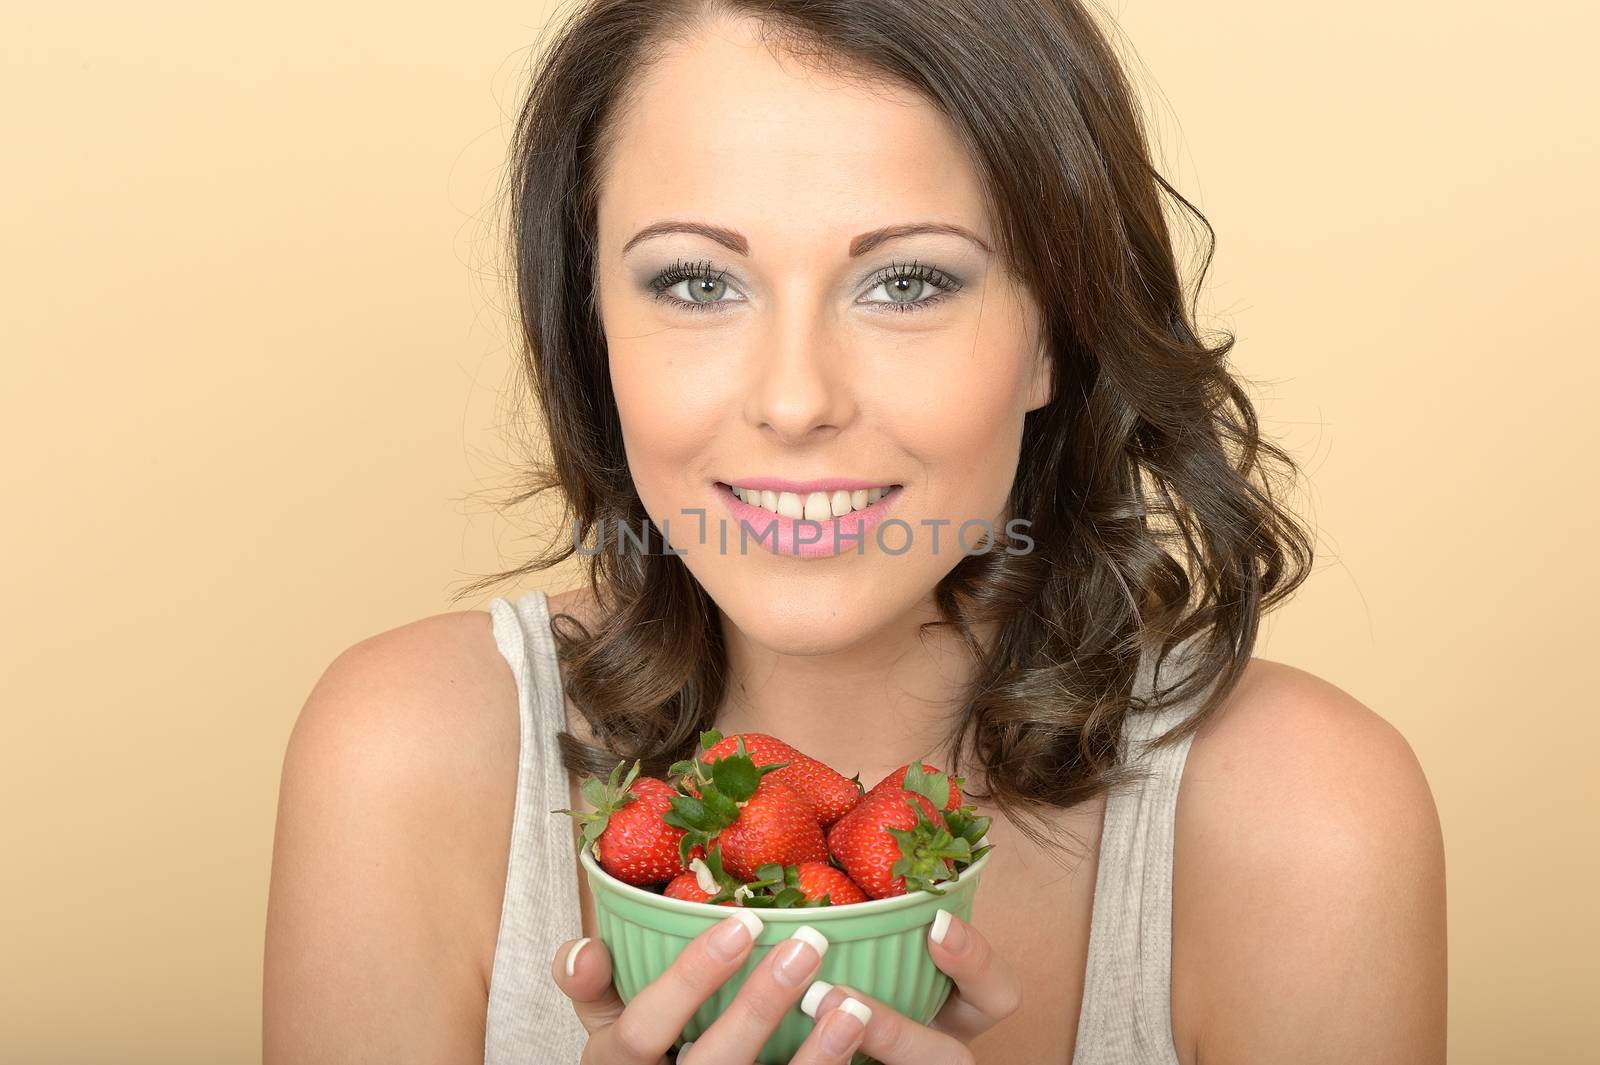 Attractive Beautiful Young Woman Looking at the Camera Eating Fresh Ripe Juicy Strawberries